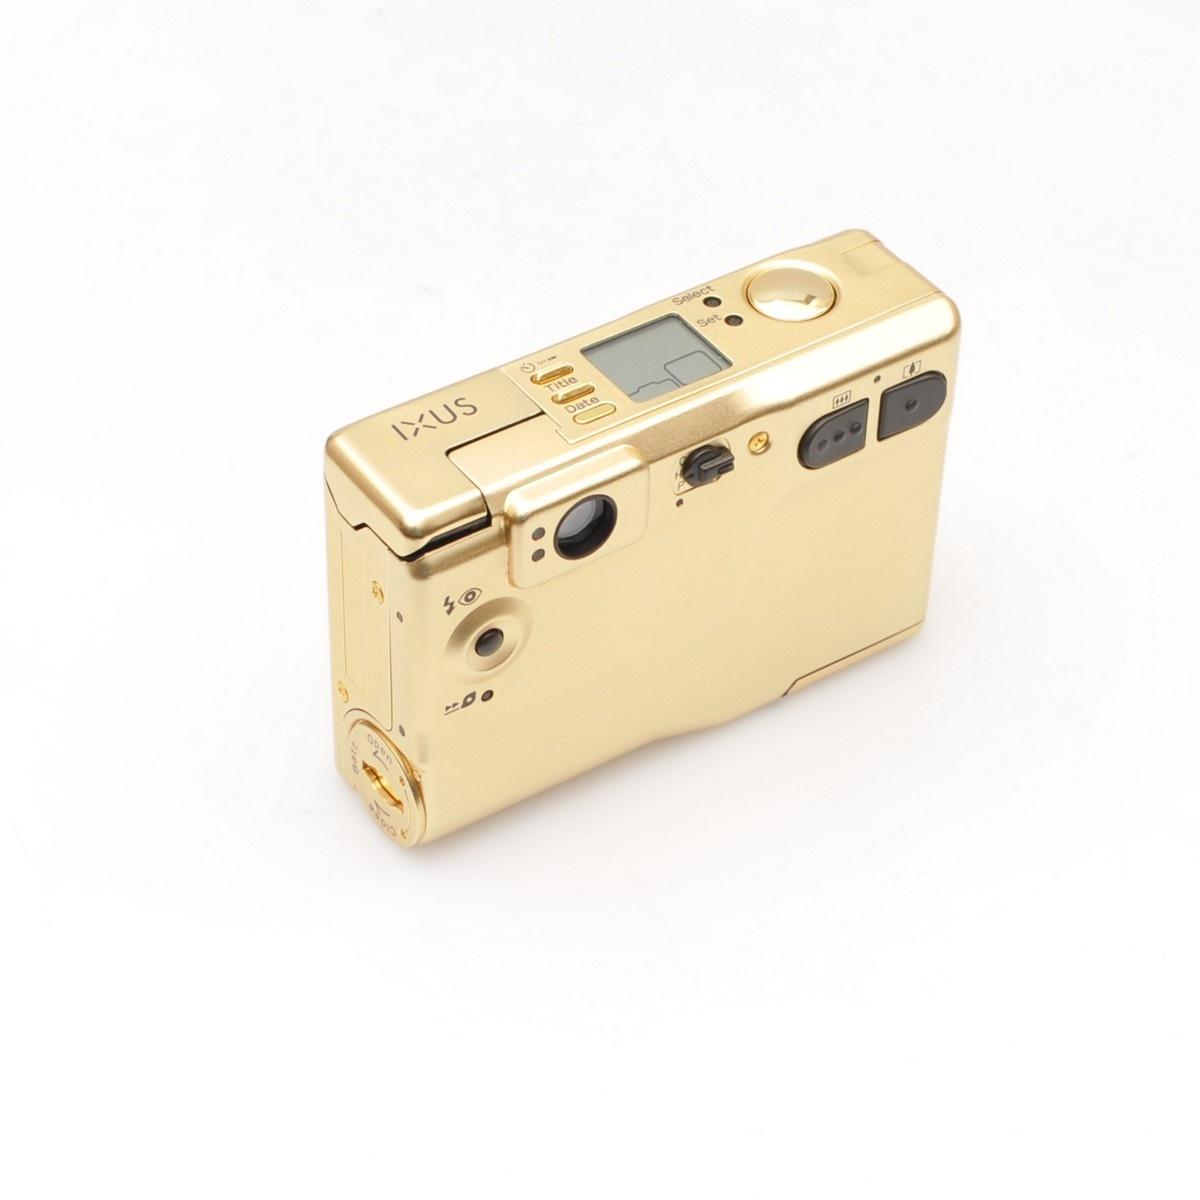 Canon Ixus limited edition in gold 60th anniversary - Collectcamera